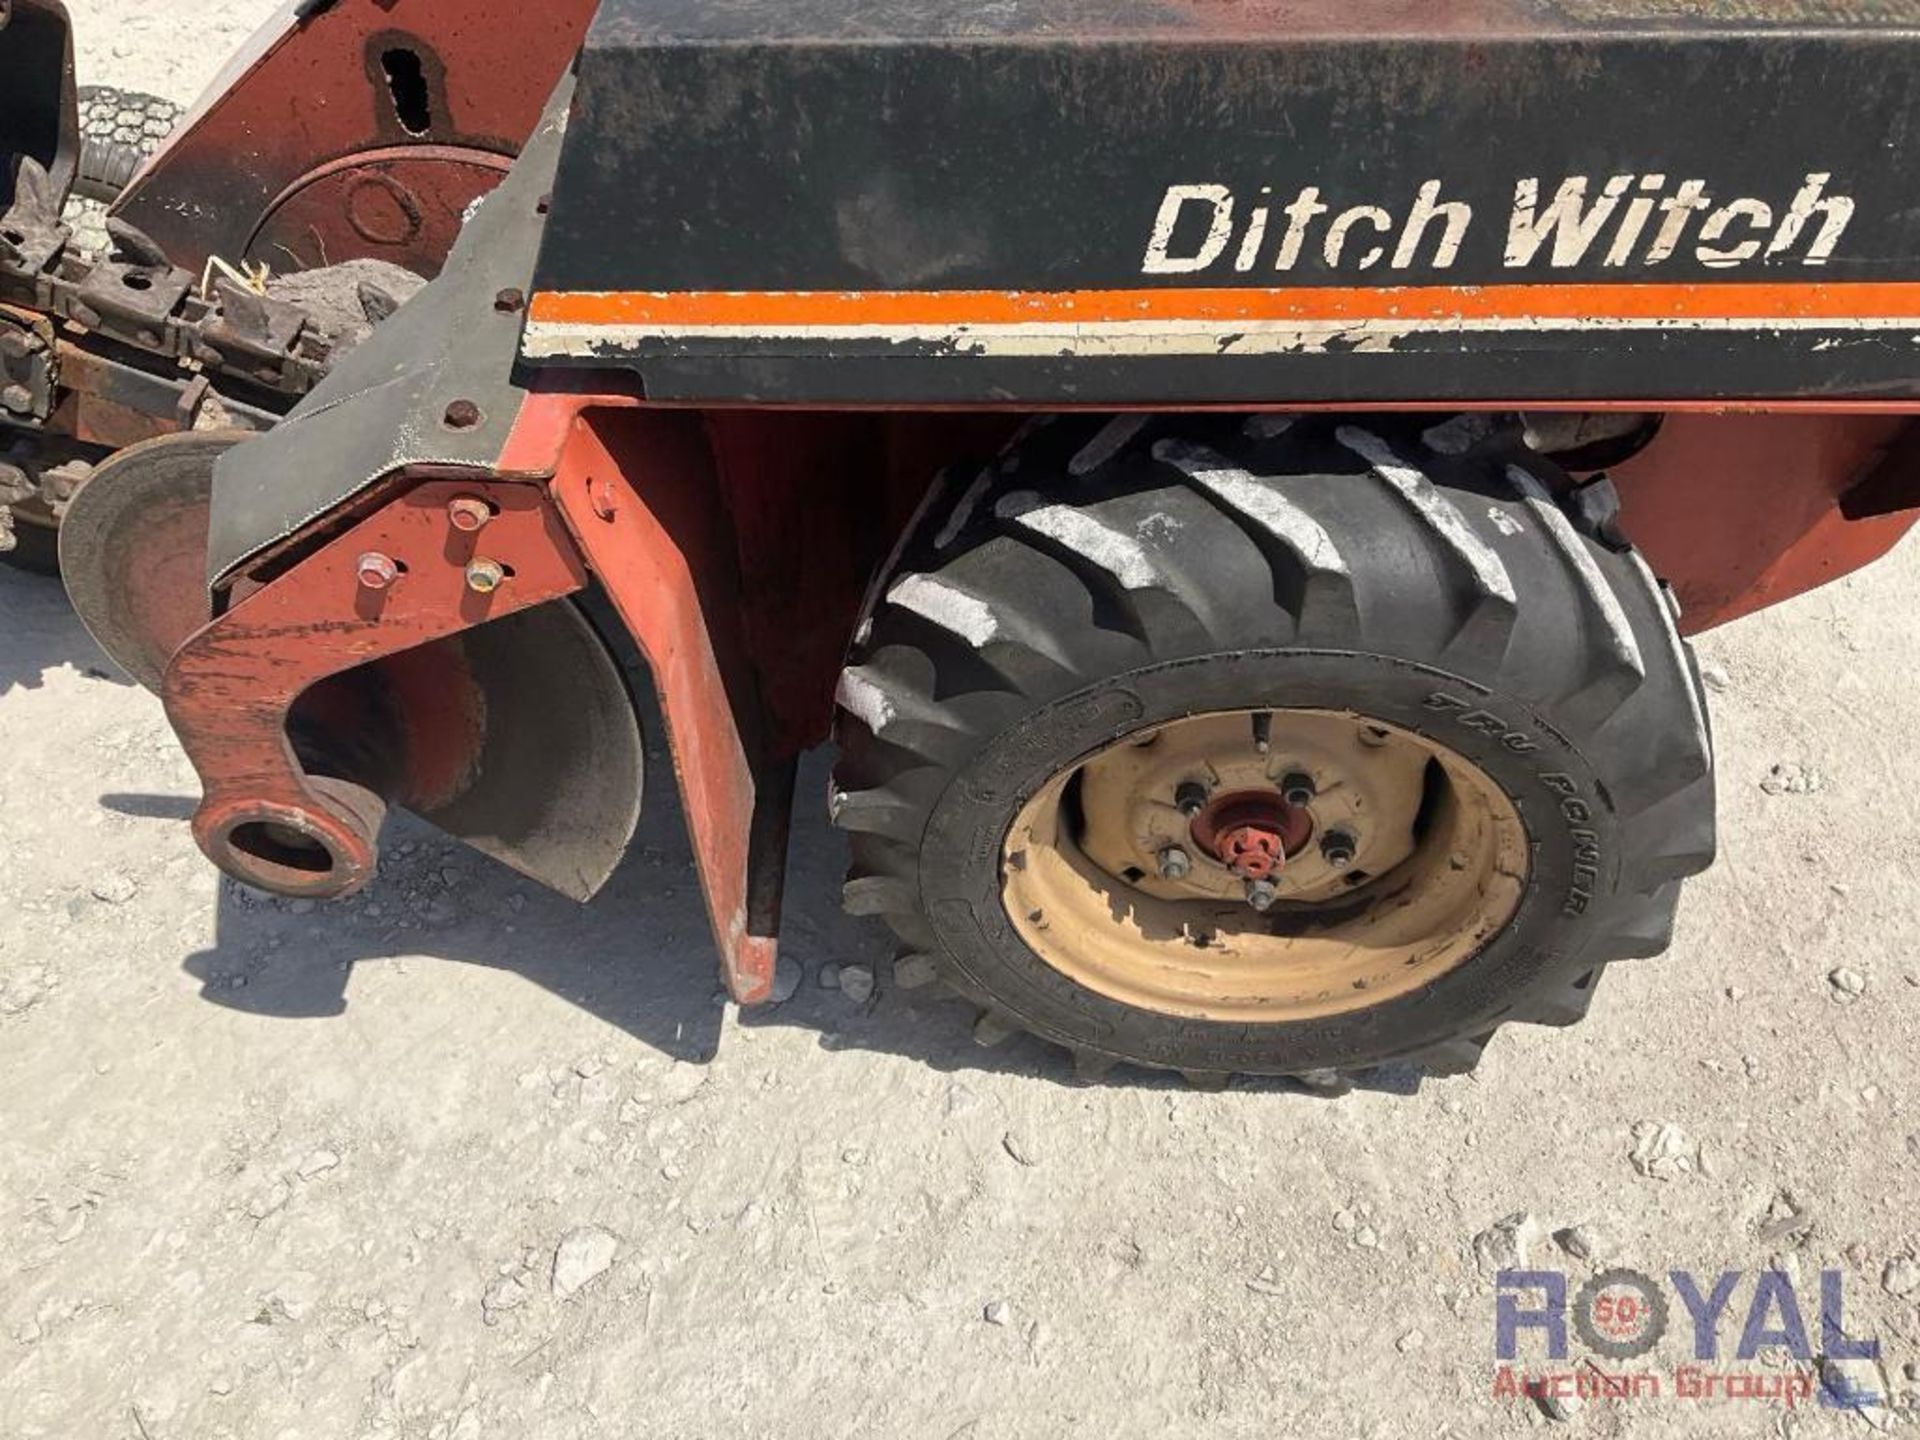 2005 Ditch Witch 1820 Walk Behind Trencher - Image 12 of 16